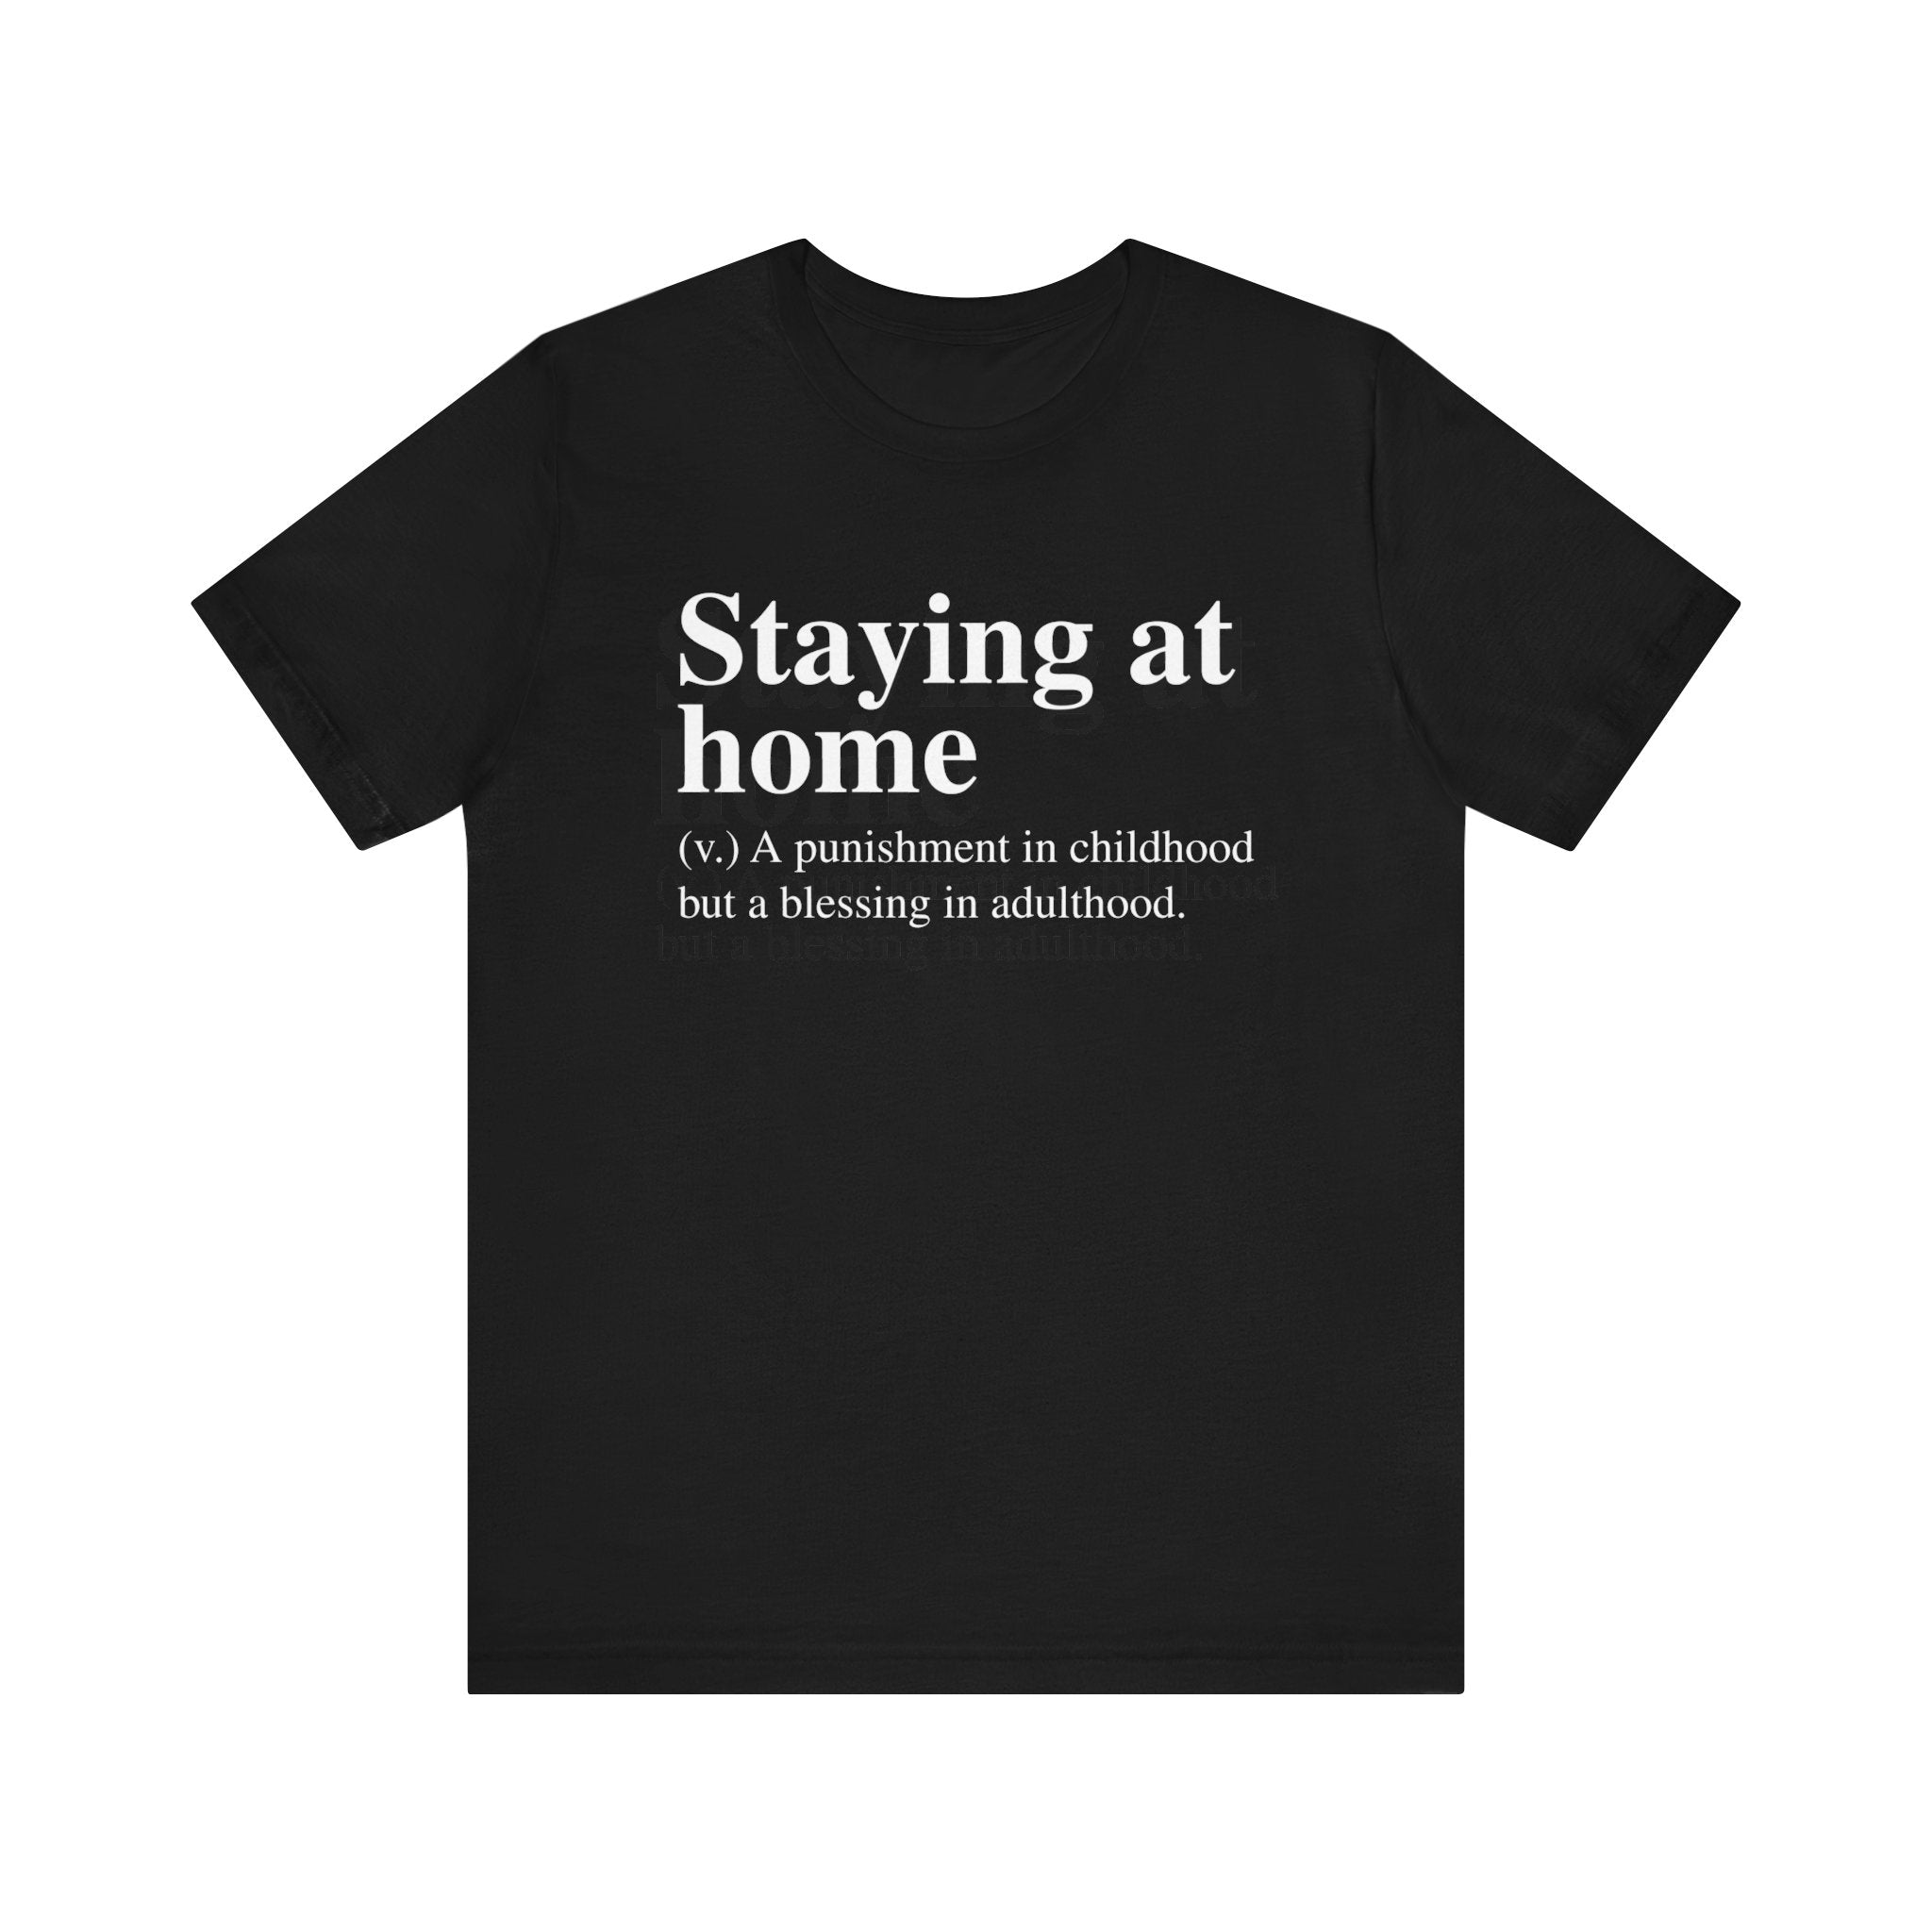 Black unisex Staying at Home T-Shirt with white text that says "staying at home - (v.) a punishment in childhood but a blessing in adulthood.